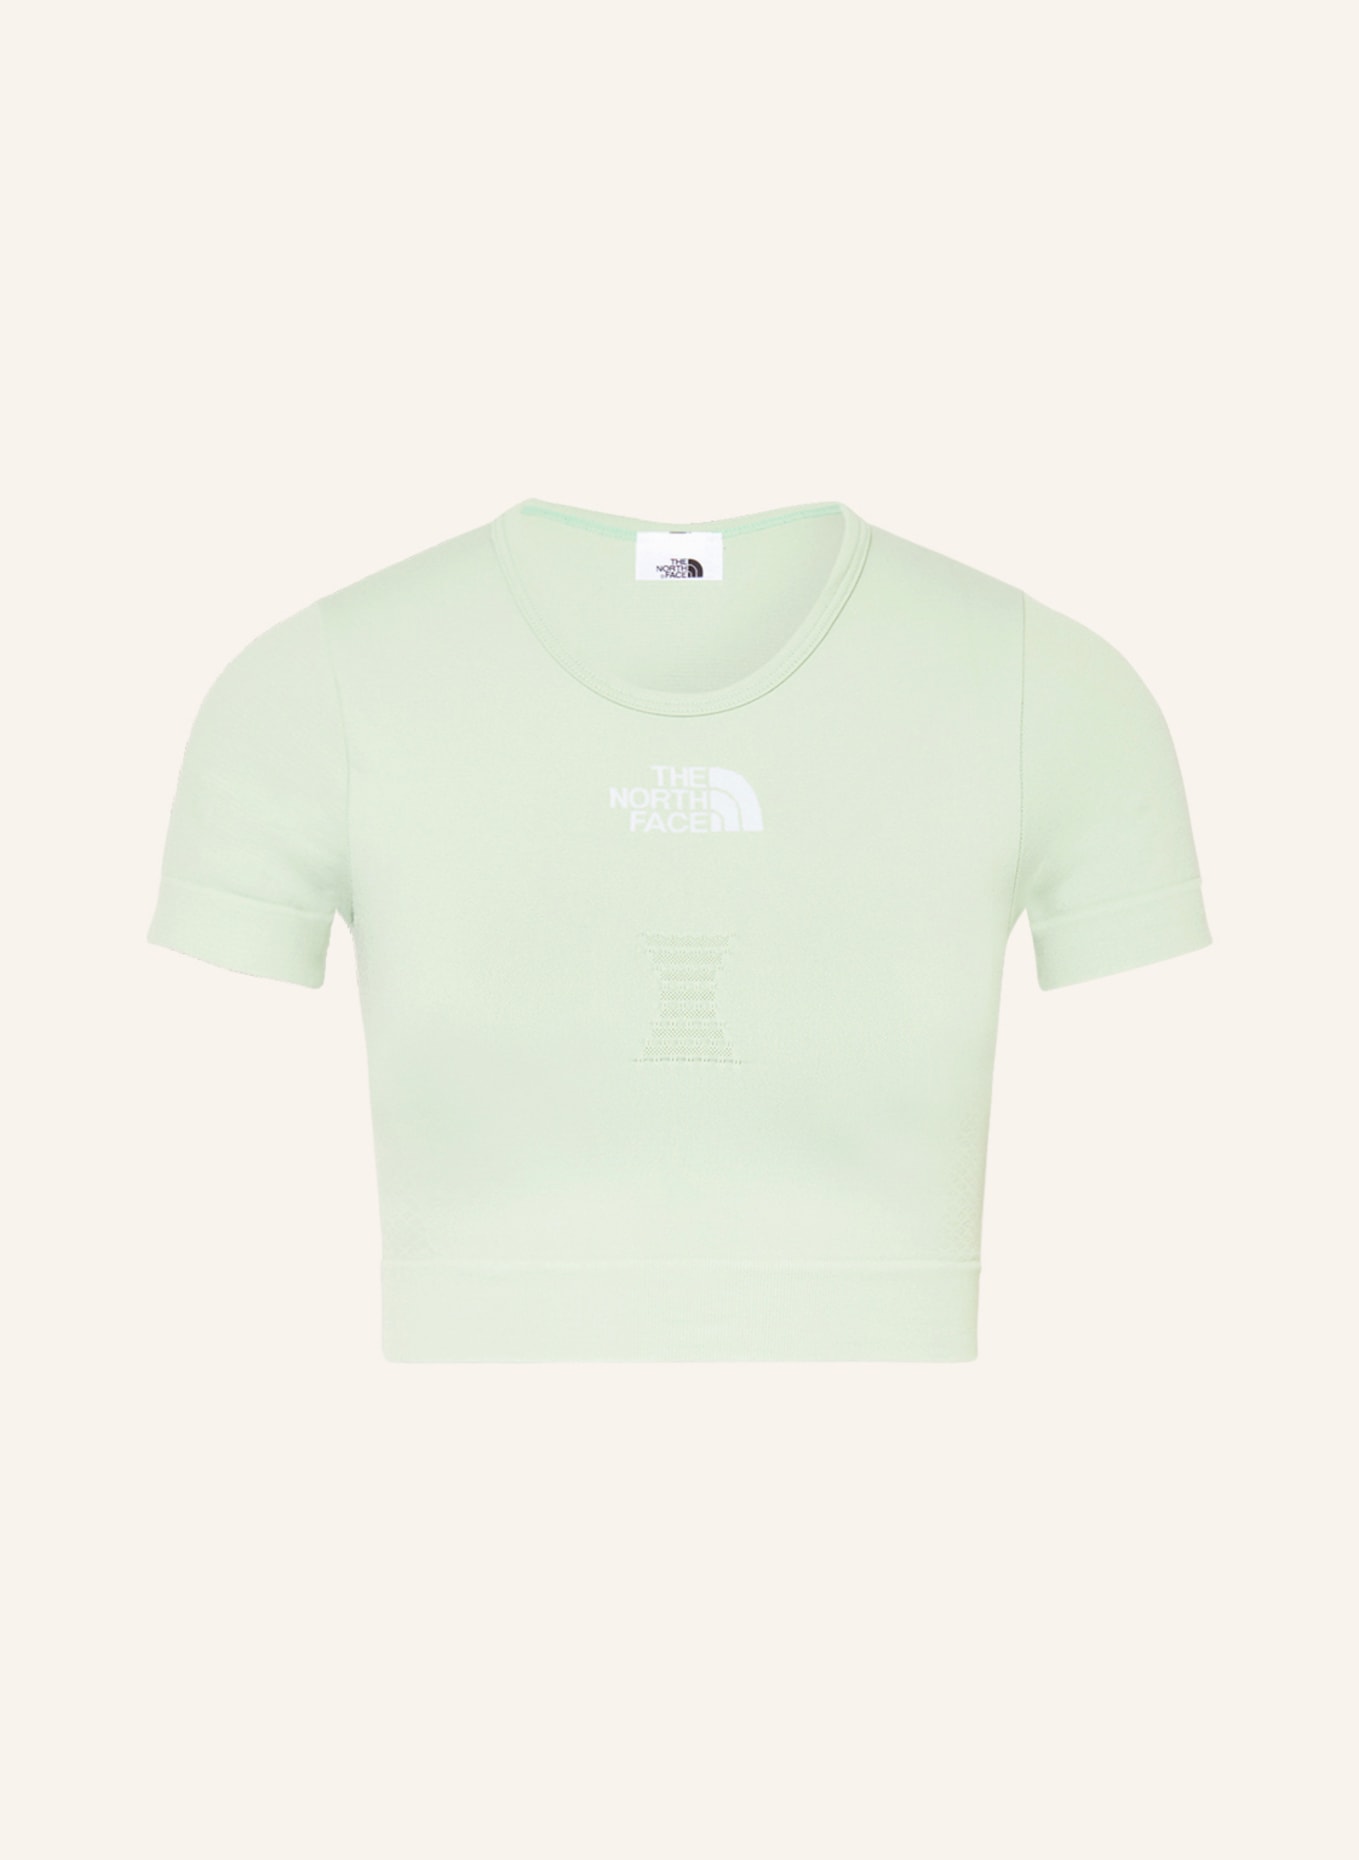 THE NORTH FACE Cropped-Shirt NEW SEAMLESS, Farbe: MINT (Bild 1)